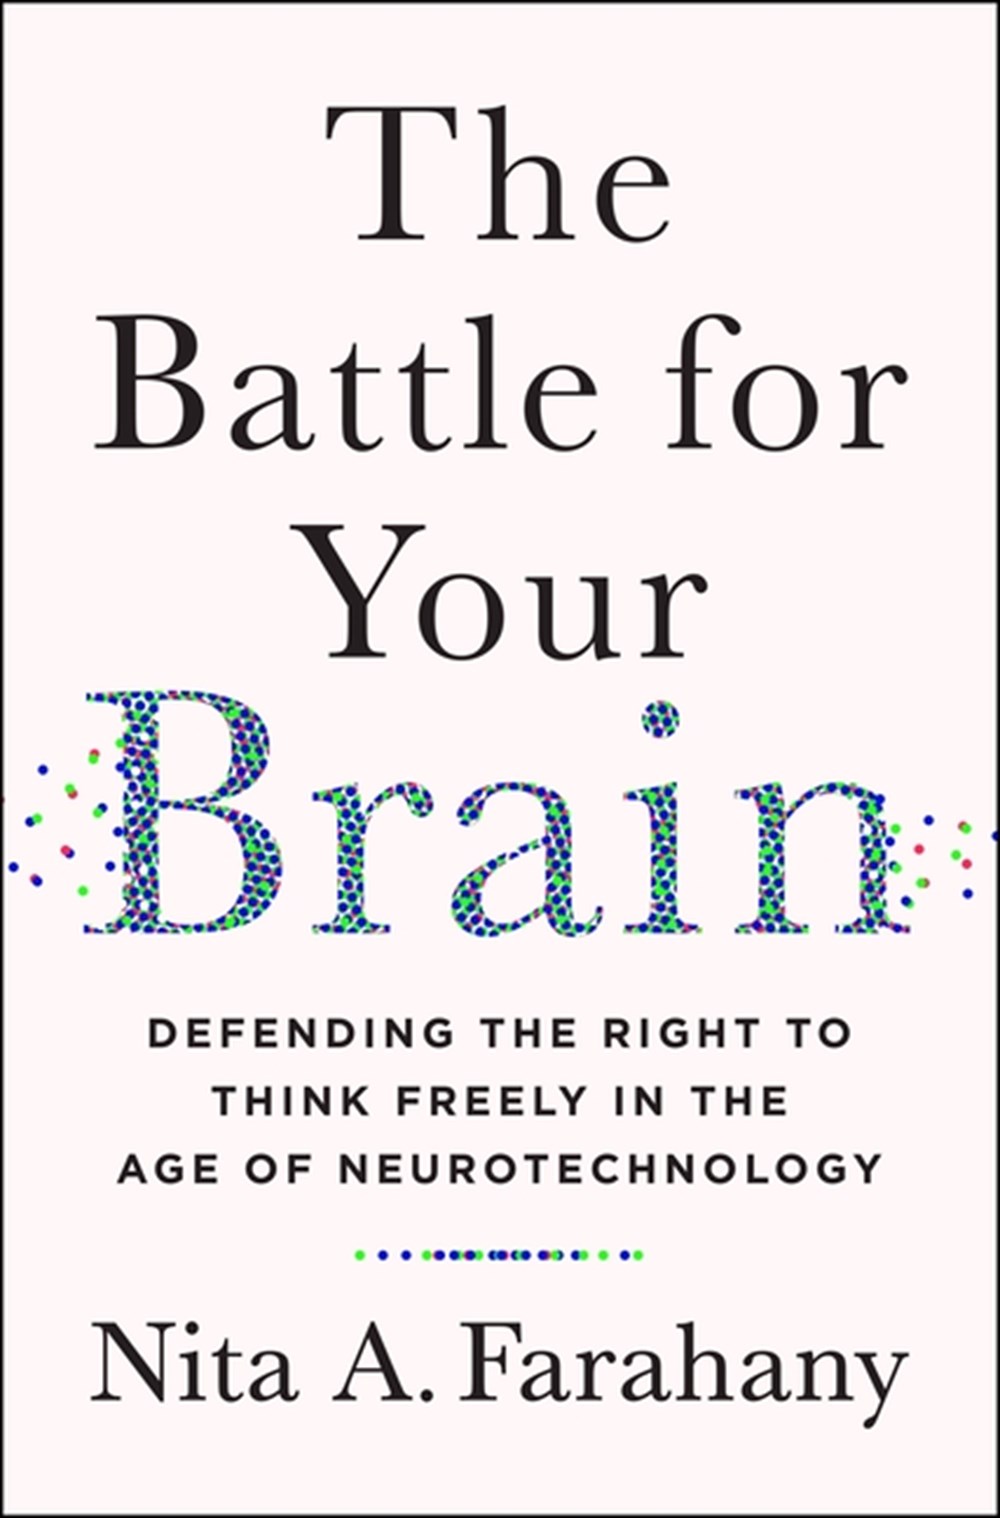 Battle for Your Brain: Defending the Right to Think Freely in the Age of Neurotechnology